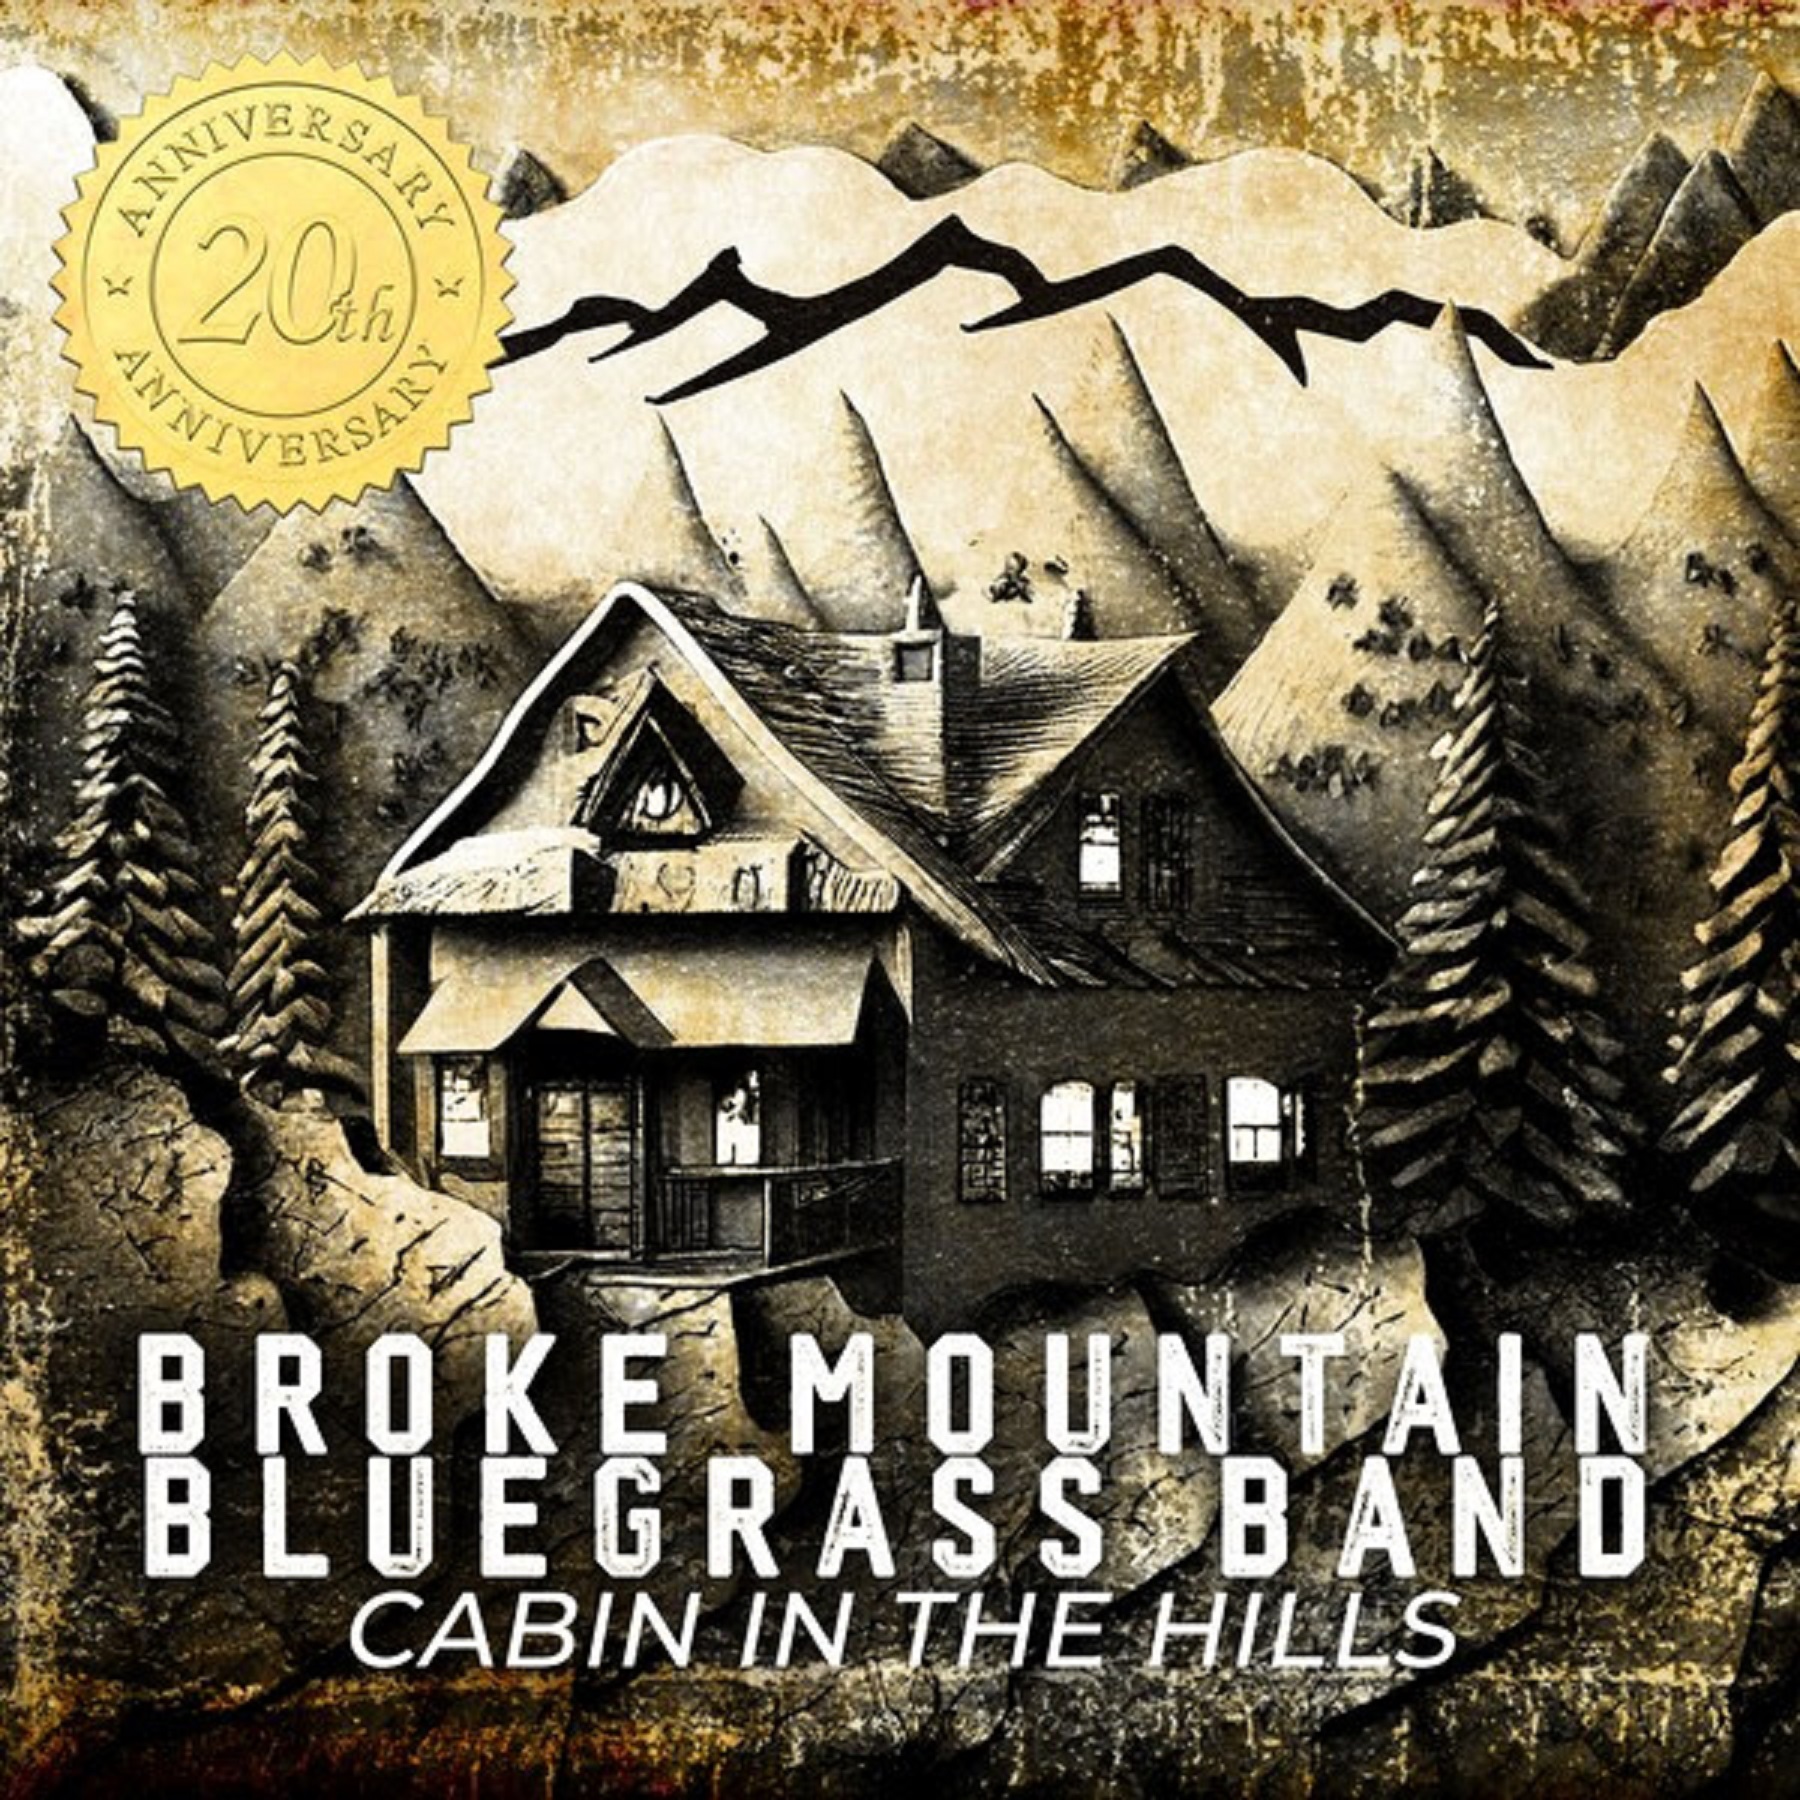 BROKE MOUNTAIN BLUEGRASS BAND CELEBRATES 20TH ANNIVERSARY WITH FIRST EVER DIGITAL RELEASE